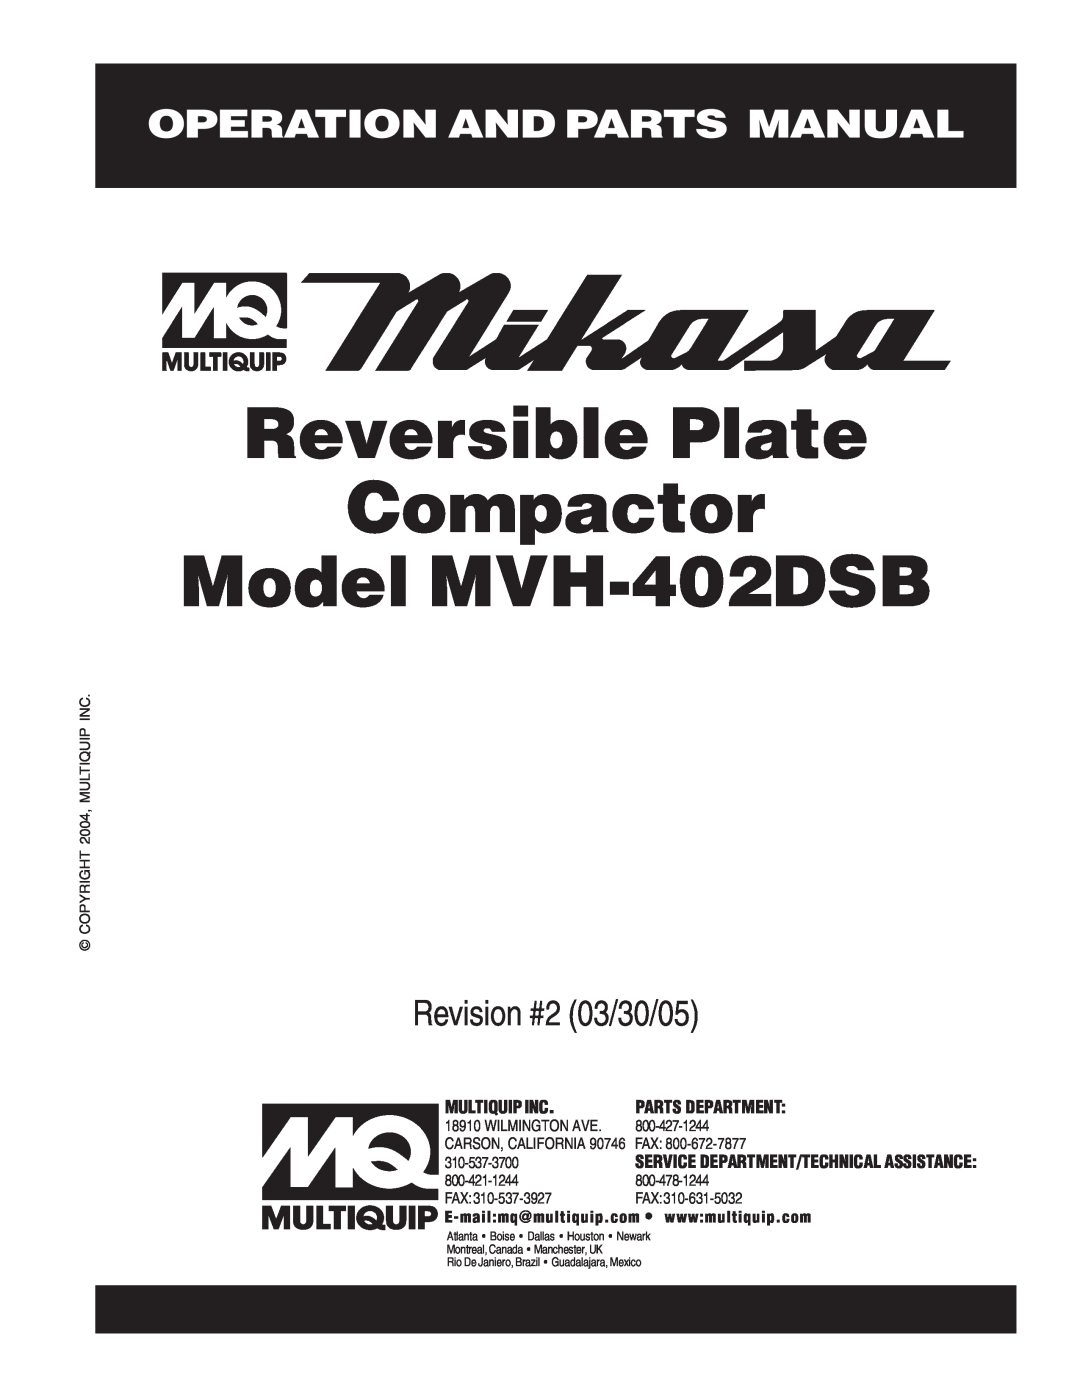 Multiquip manual Operation And Parts Manual, Reversible Plate Compactor Model MVH-402DSB, Revision #2 03/30/05 